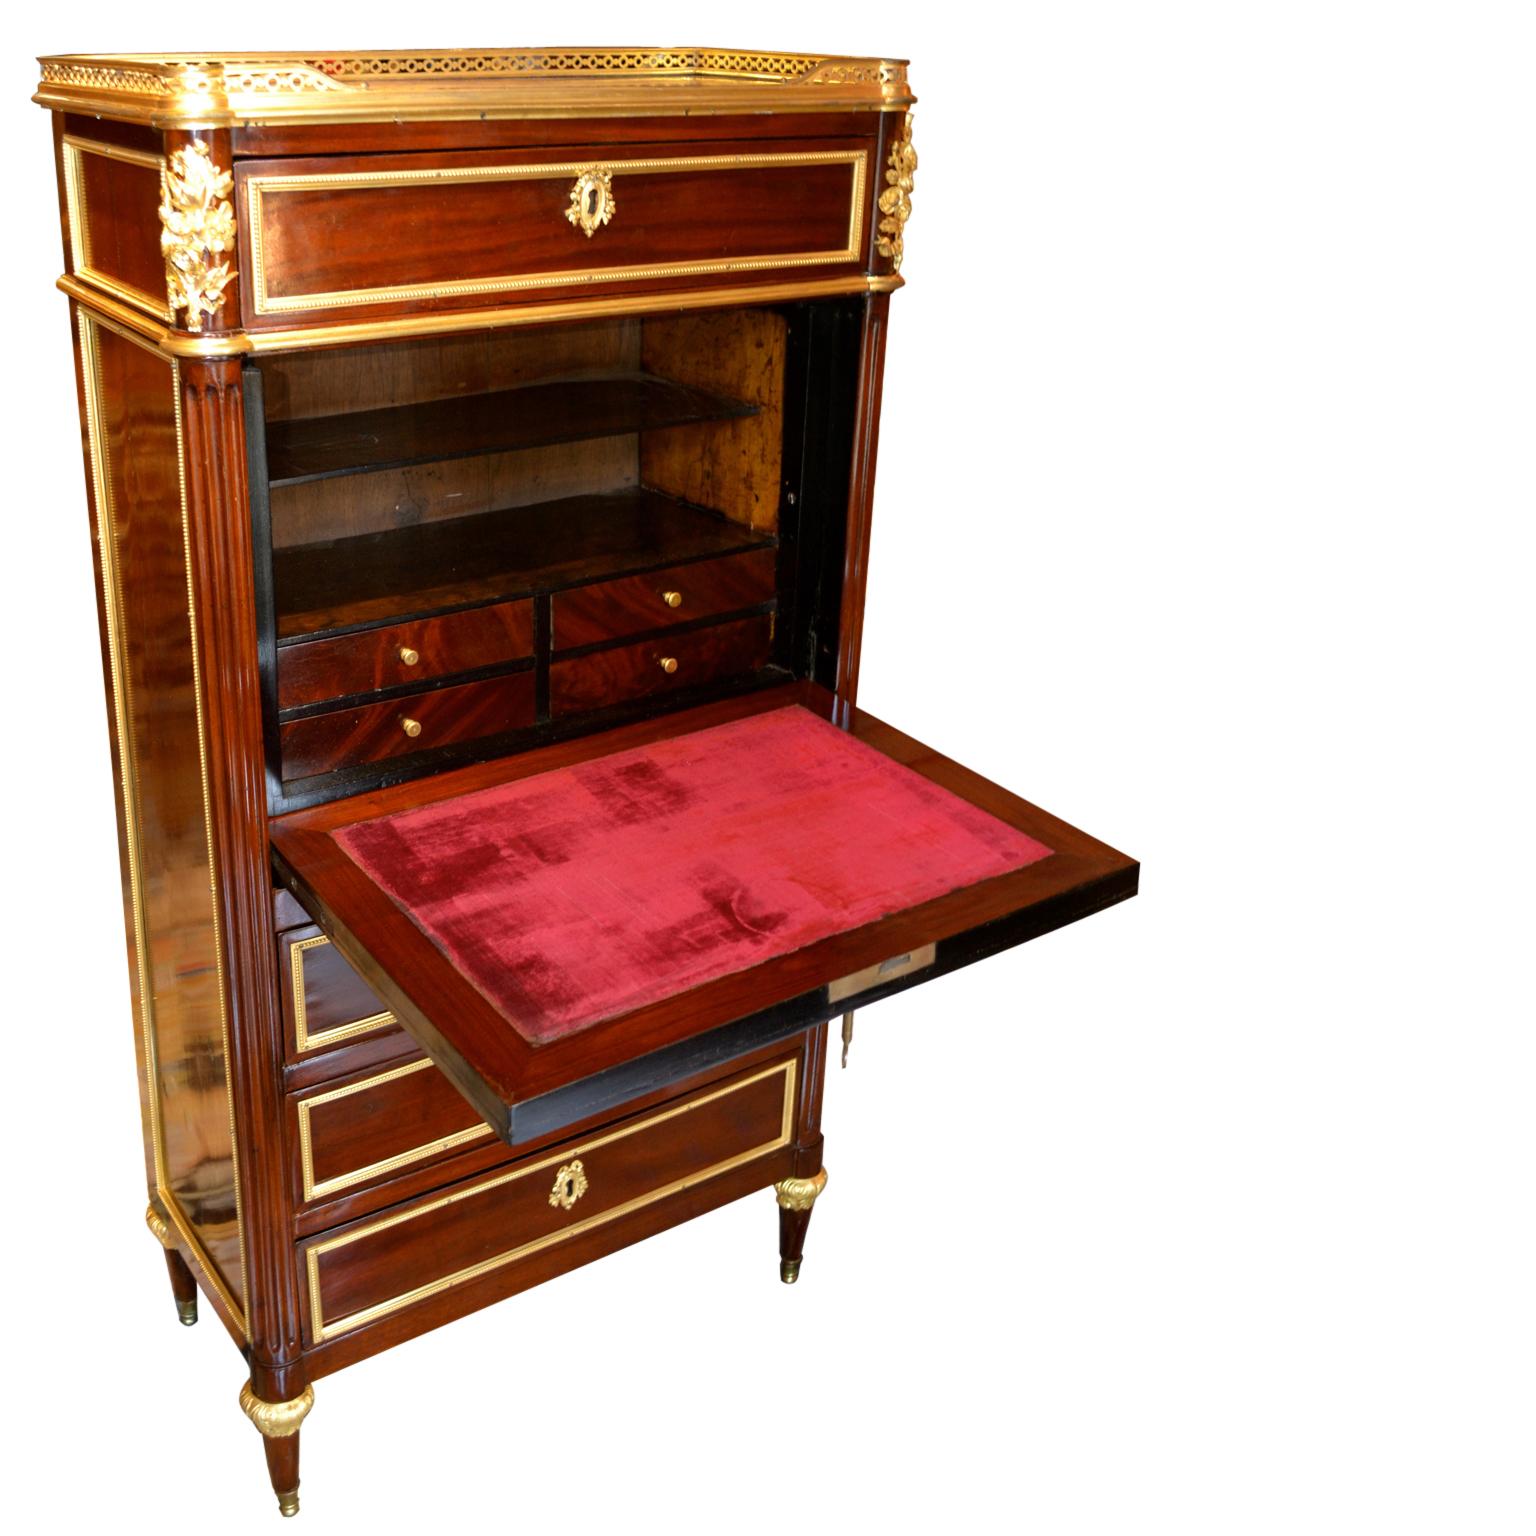 A small scale Louis XVI abbatant (drop front desk) and chest of drawers in mahogany and satinwood with gilded bronze mounts; the satinwood door front opening to reveal a fitted interior and a velvet lined writing surface; the desk surmounted with a